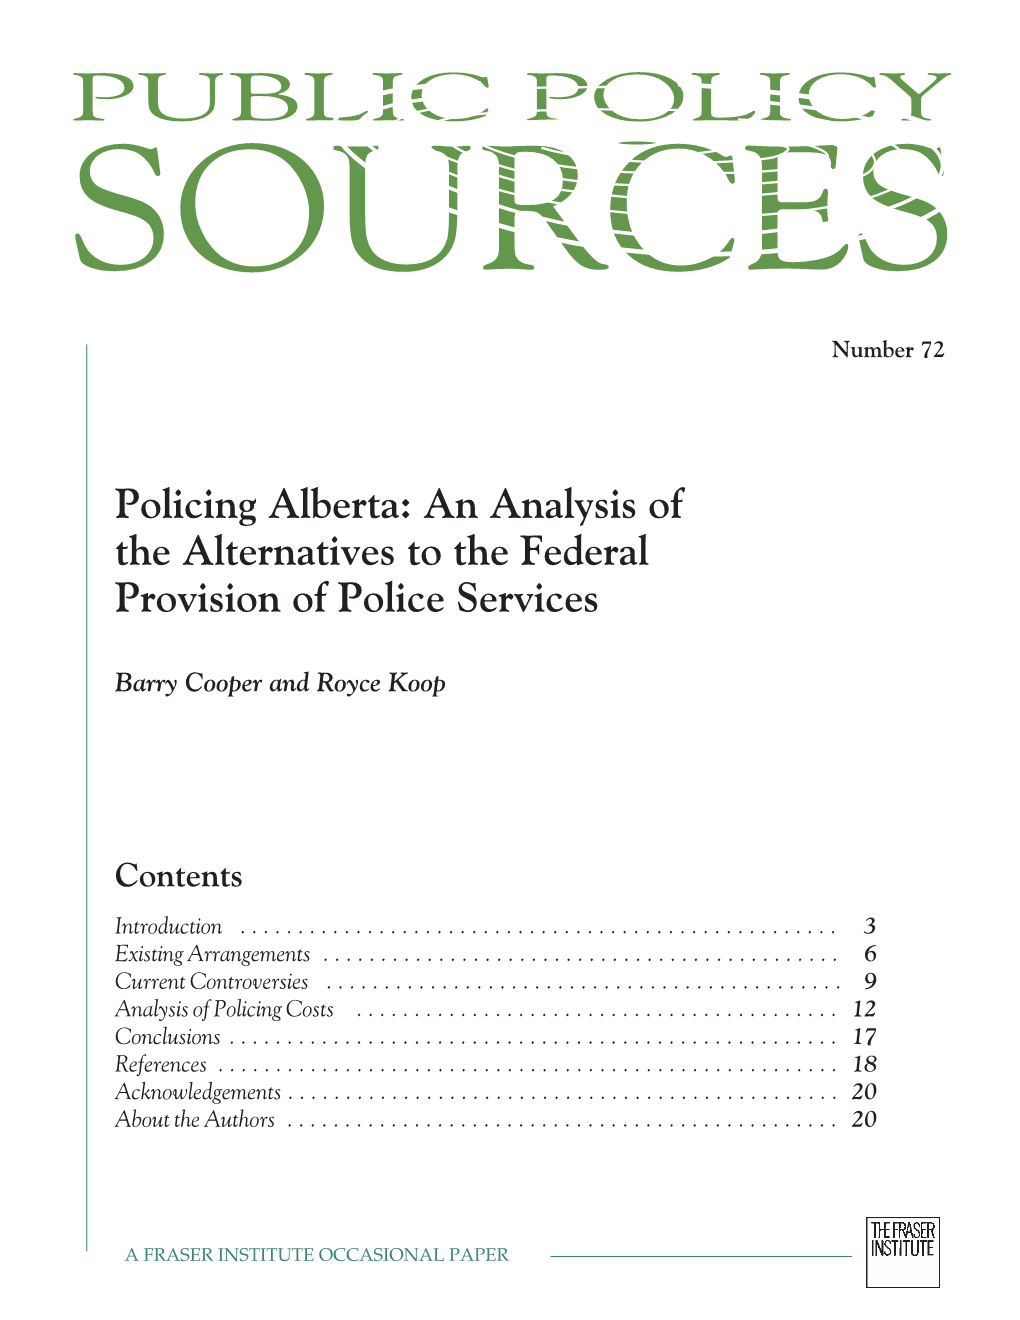 Policing Alberta: an Analysis of the Alternatives to the Federal Provision of Police Services